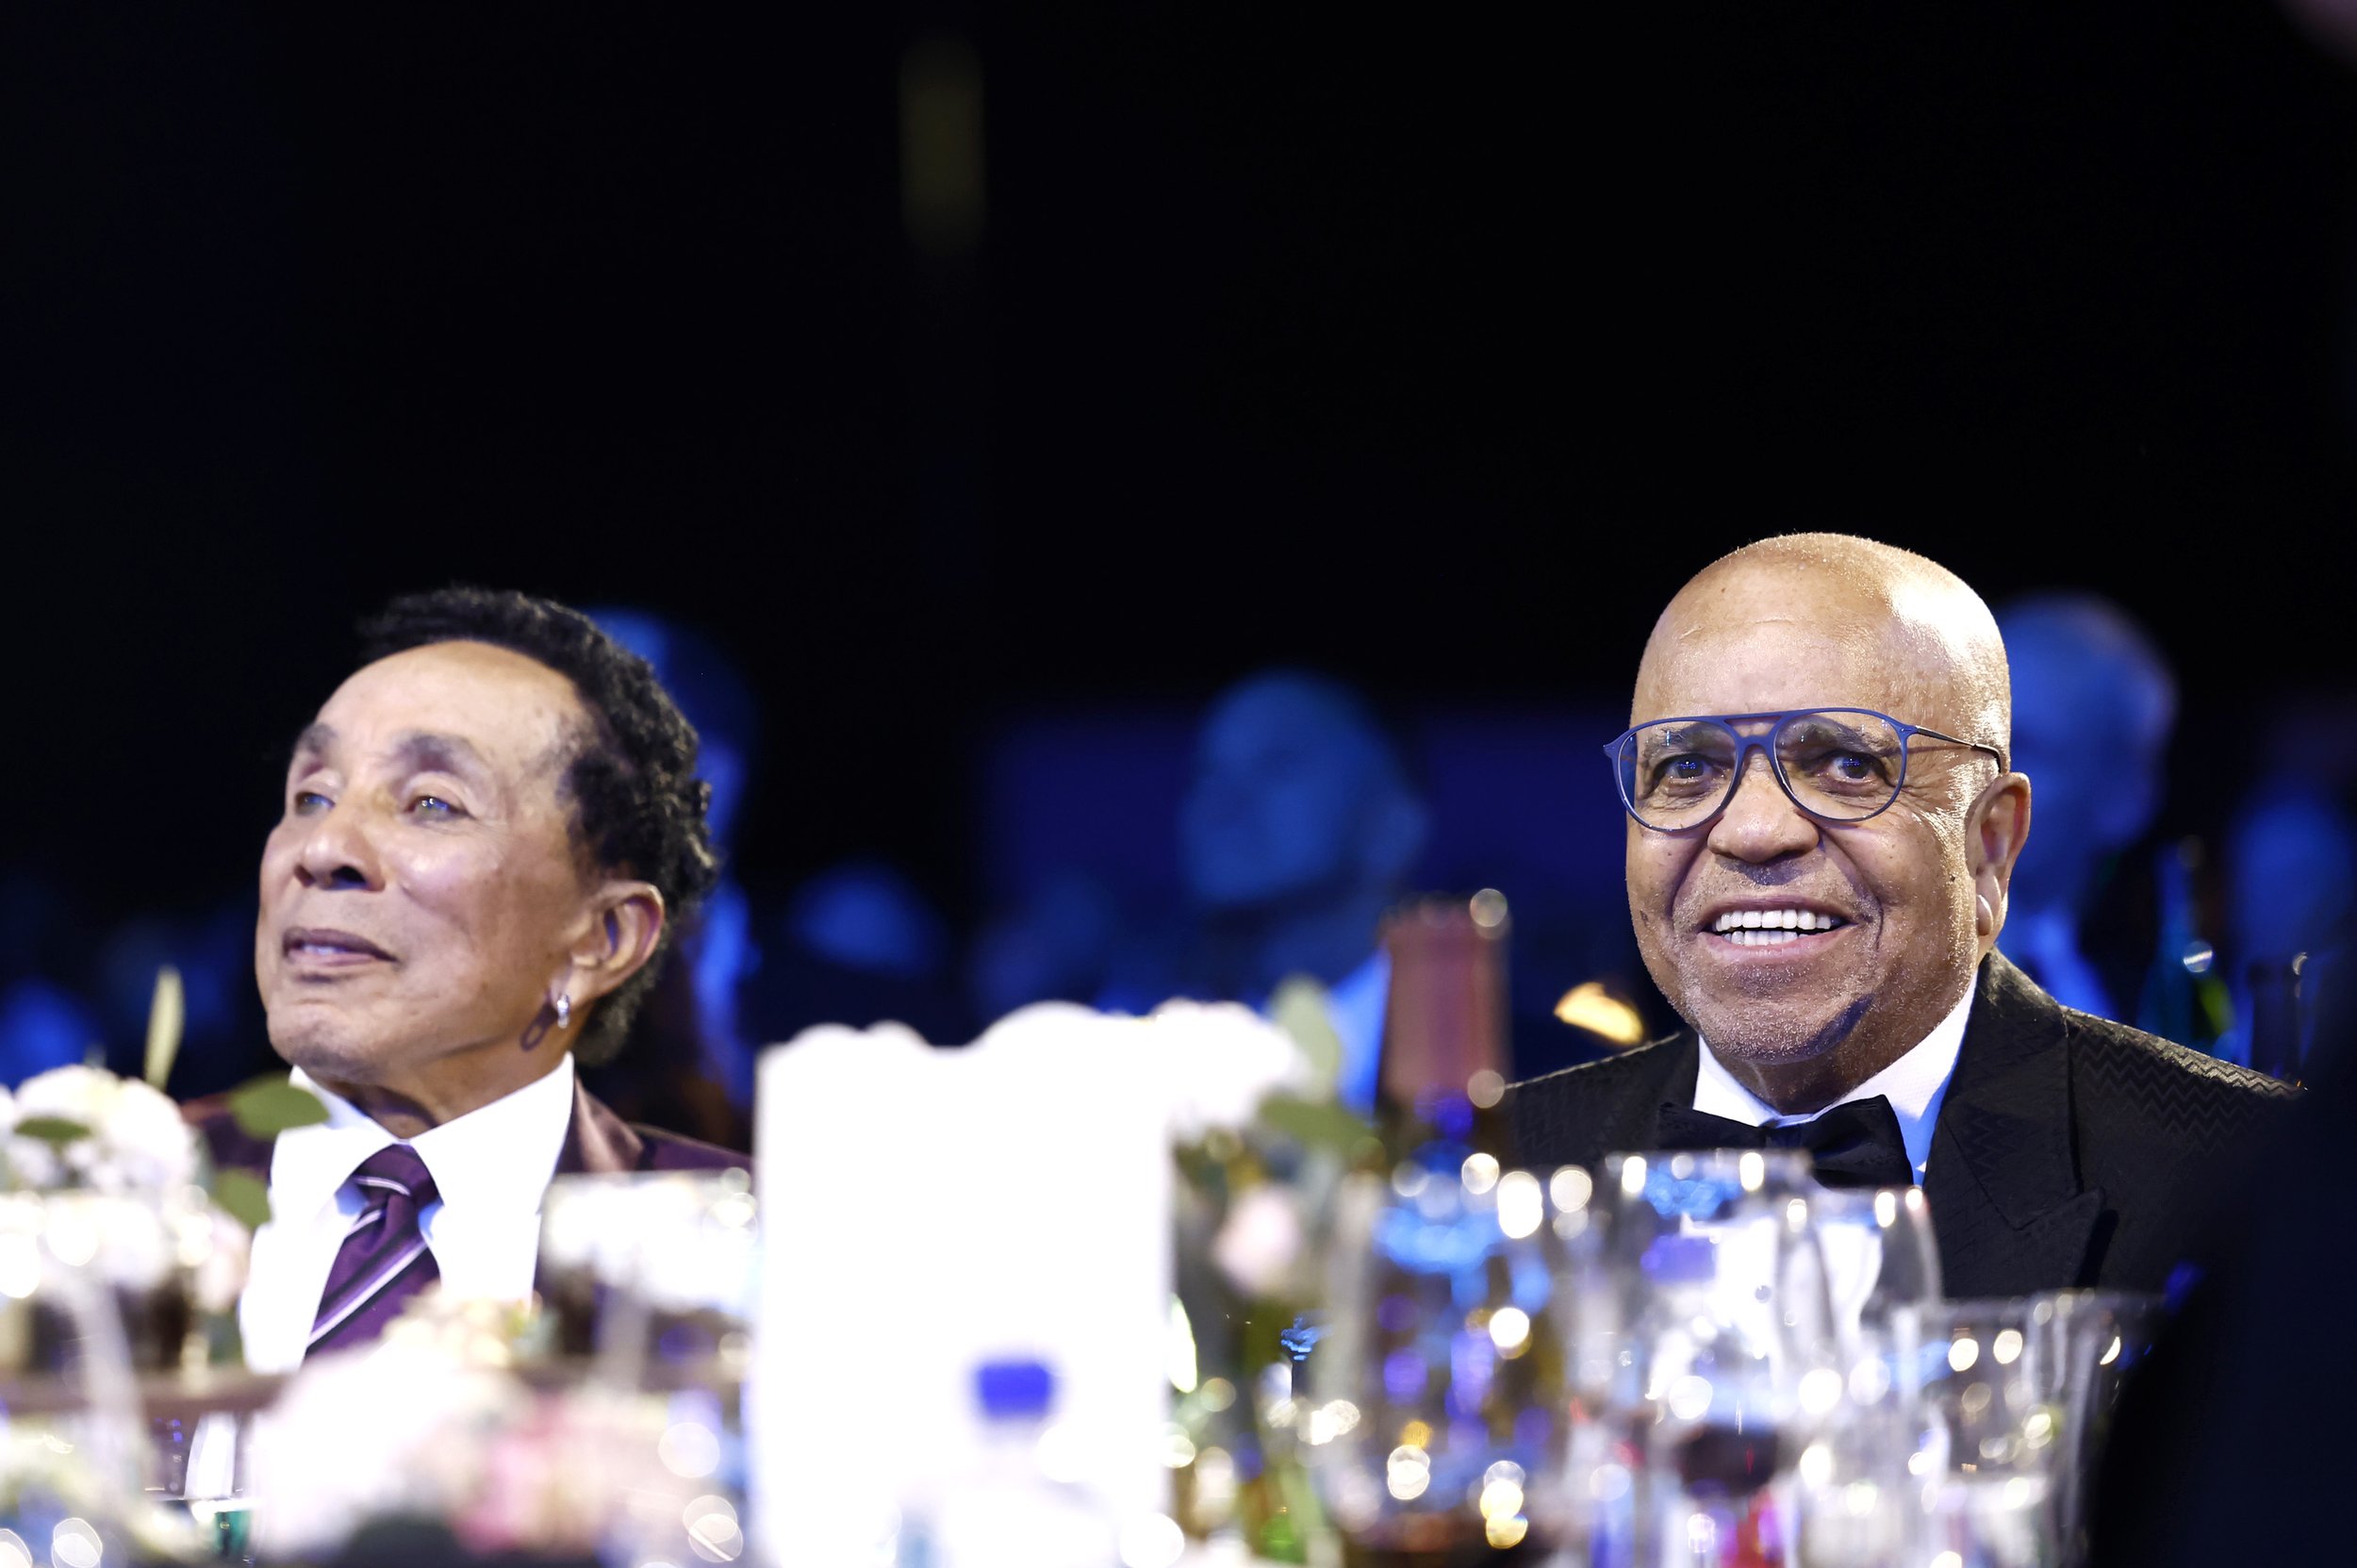  LOS ANGELES, CALIFORNIA - FEBRUARY 03: (L-R) Smokey Robinson and Berry Gordy attend MusiCares Persons of the Year Honoring Berry Gordy and Smokey Robinson at Los Angeles Convention Center on February 03, 2023 in Los Angeles, California. (Photo by Em